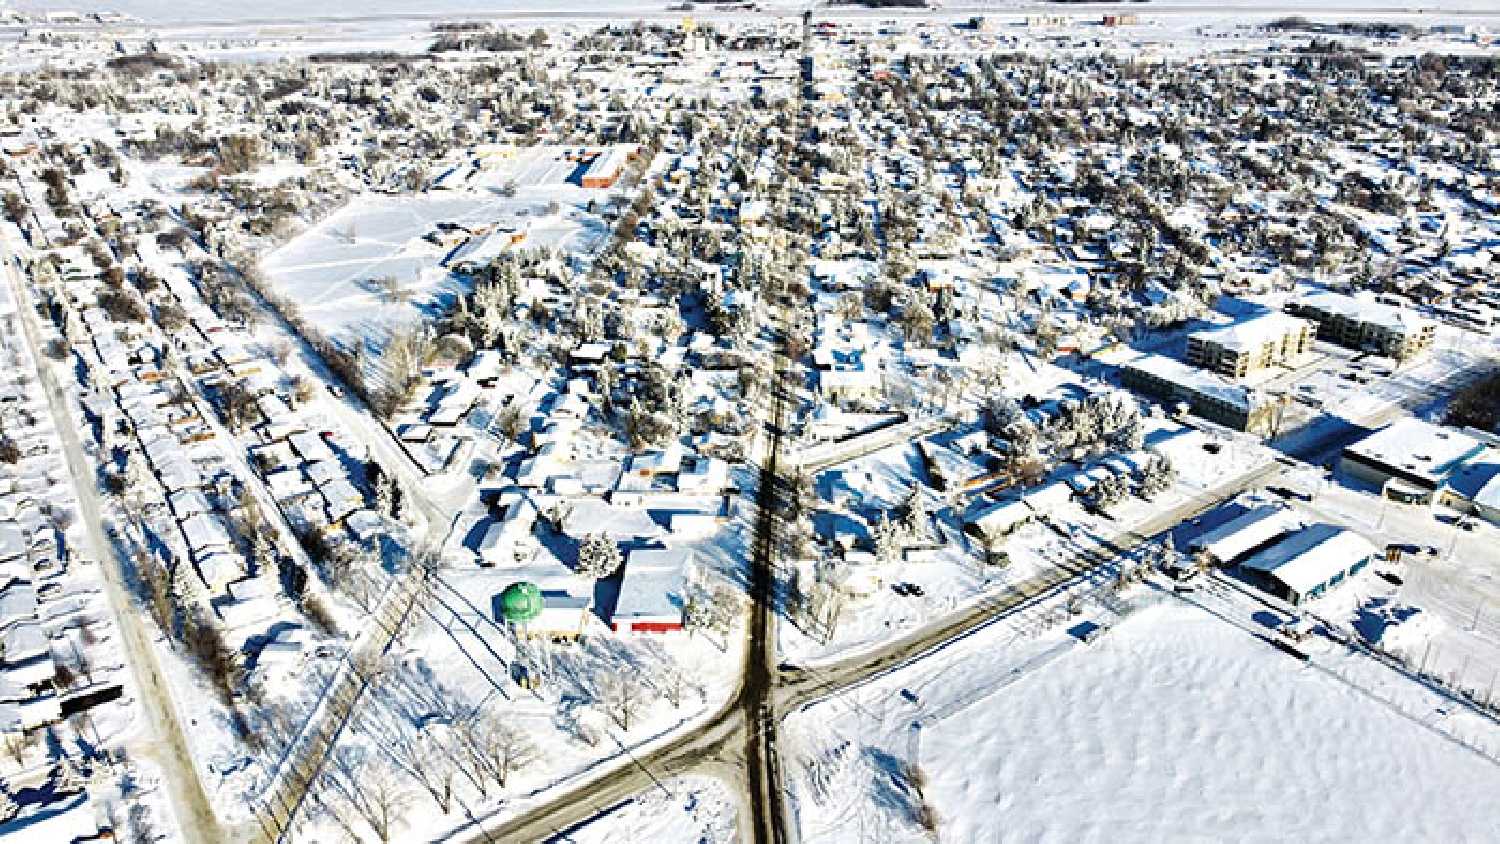 An aerial picture of Moosomin taken by Kevin Weedmark